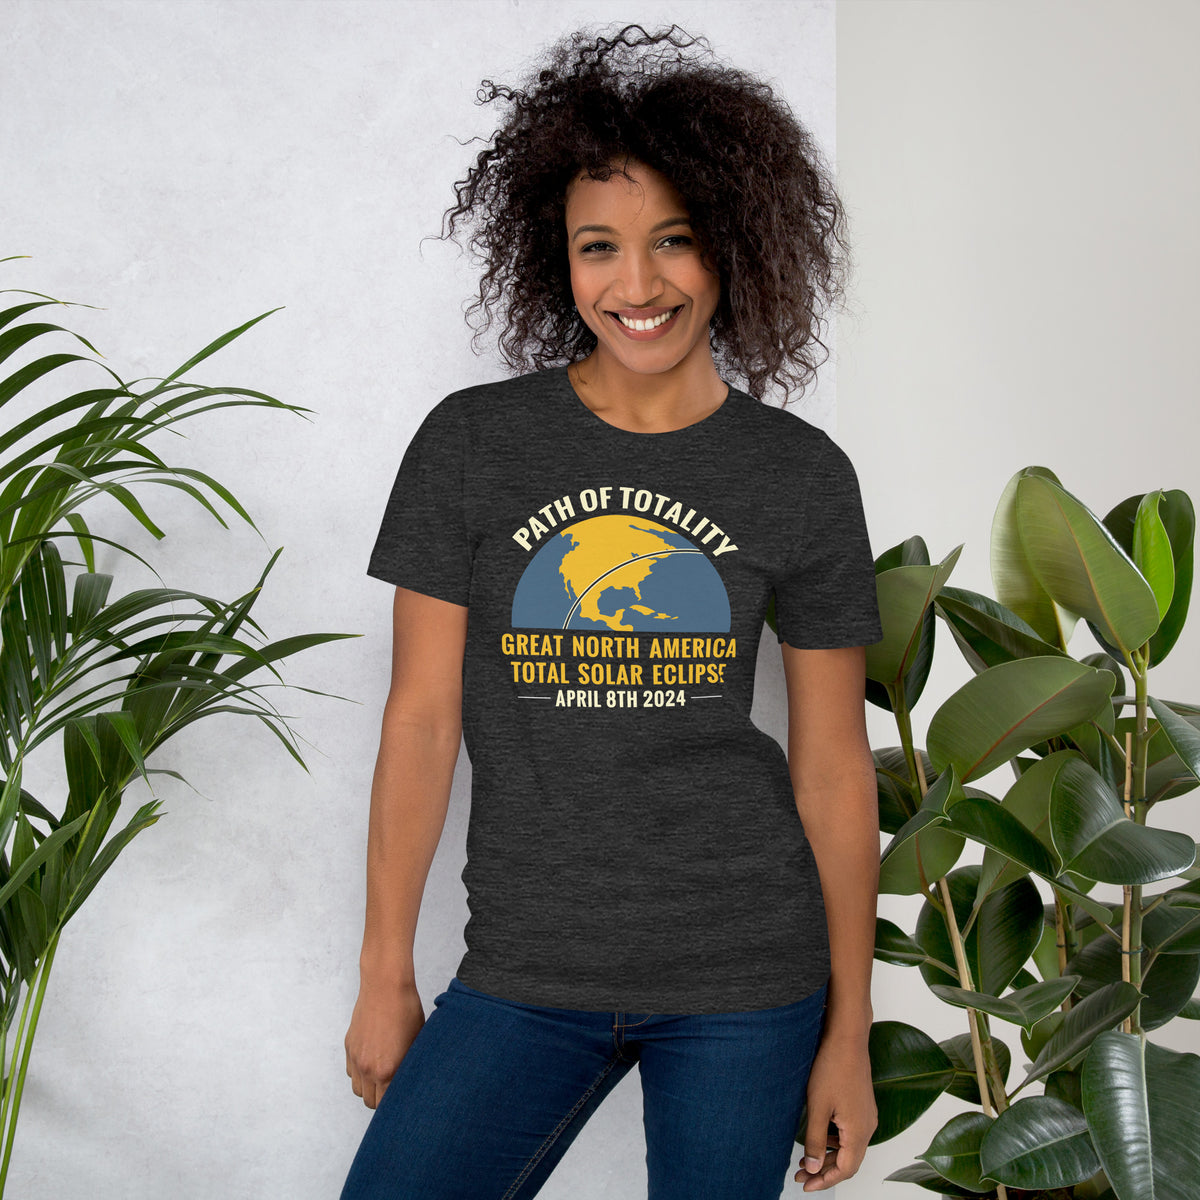 April 8 2024 Total Solar Eclipse Family Tee, Path of Totality Souvenir Shirt, Great North American Total Solar Eclipse, Matching Group Apparel